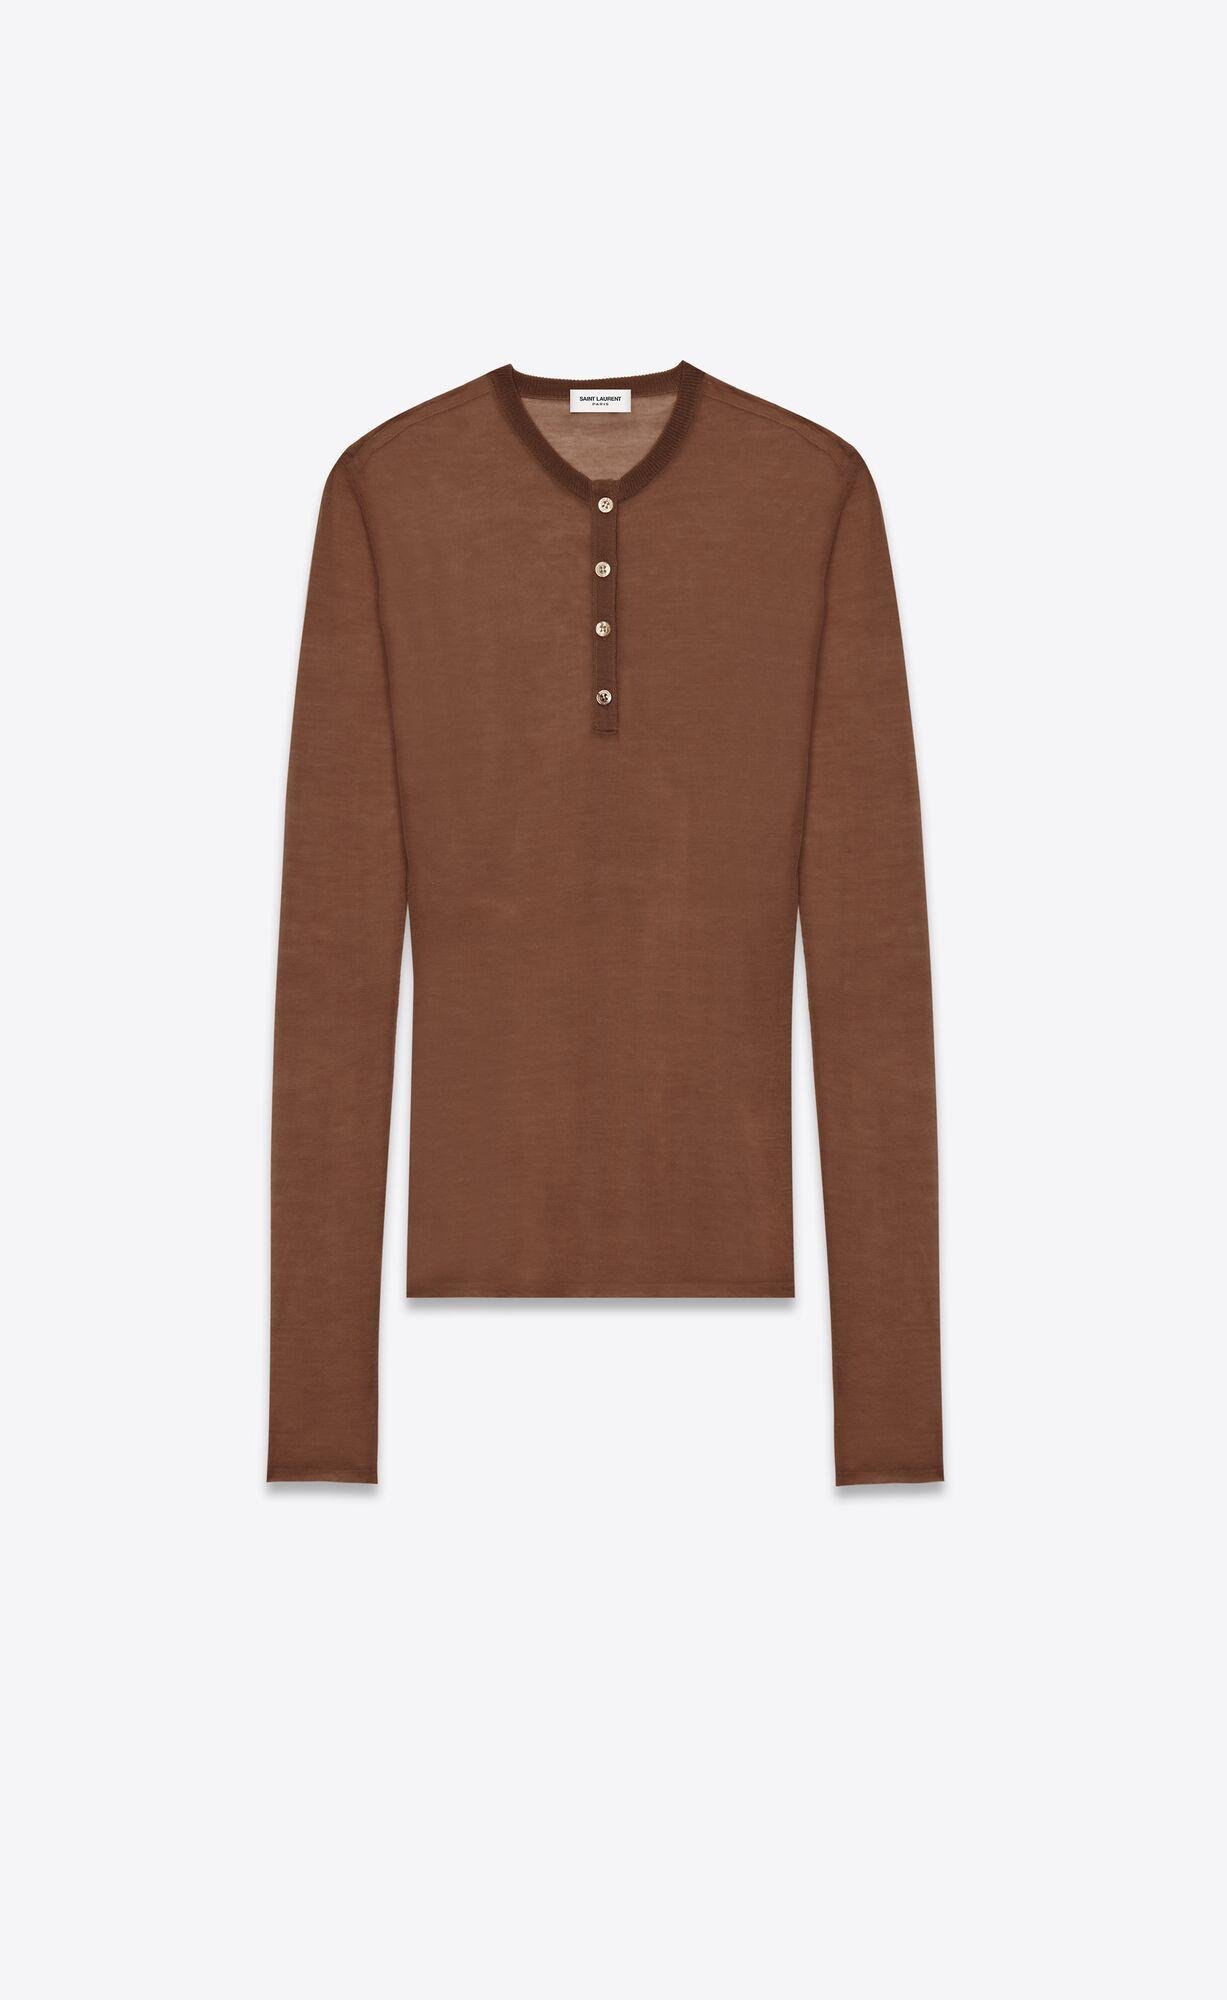 henley shirt in knit by SAINT LAURENT